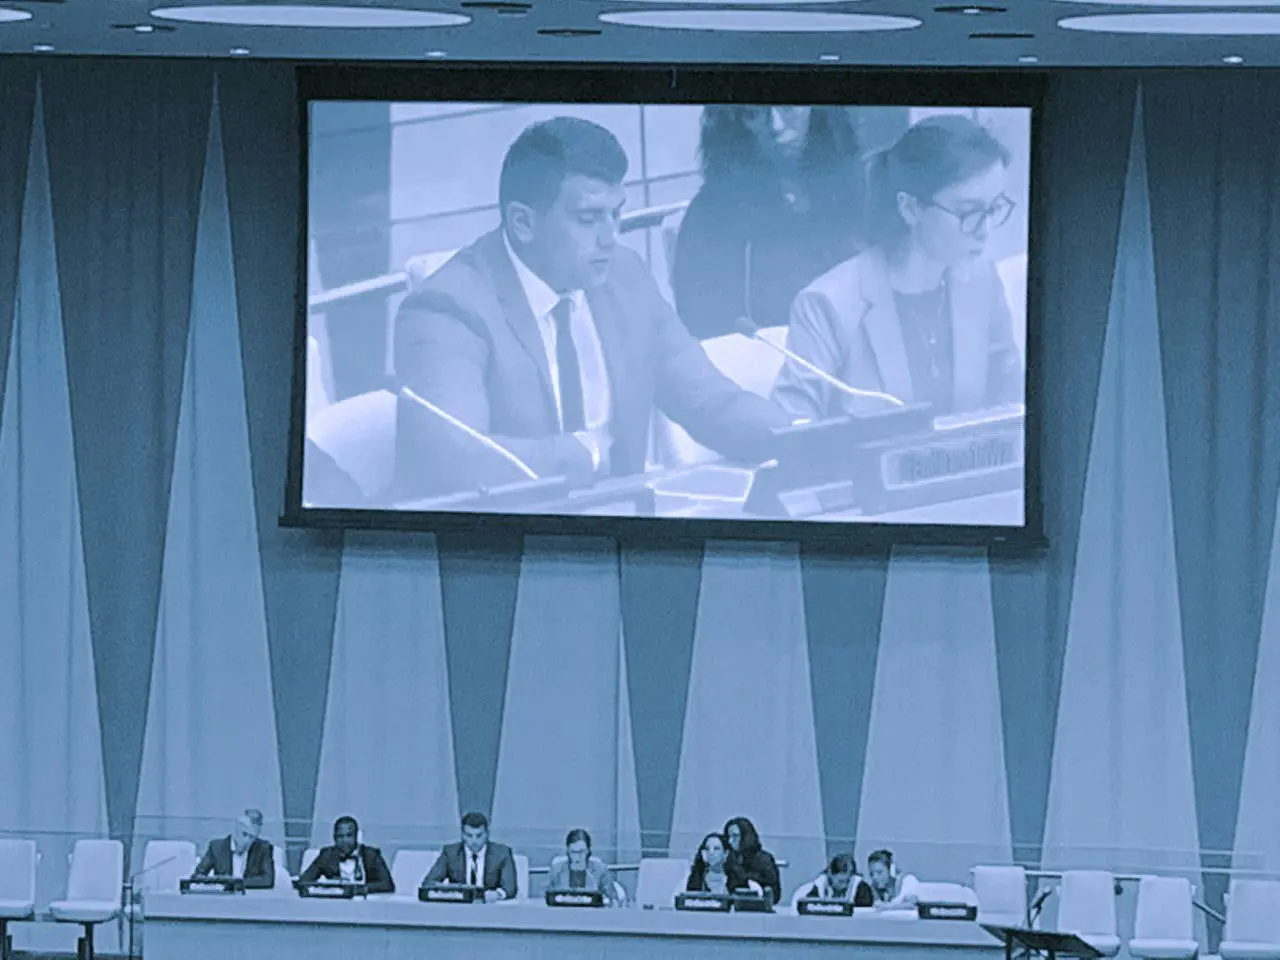 Image of Alen speaking on a projector screen at the UN.